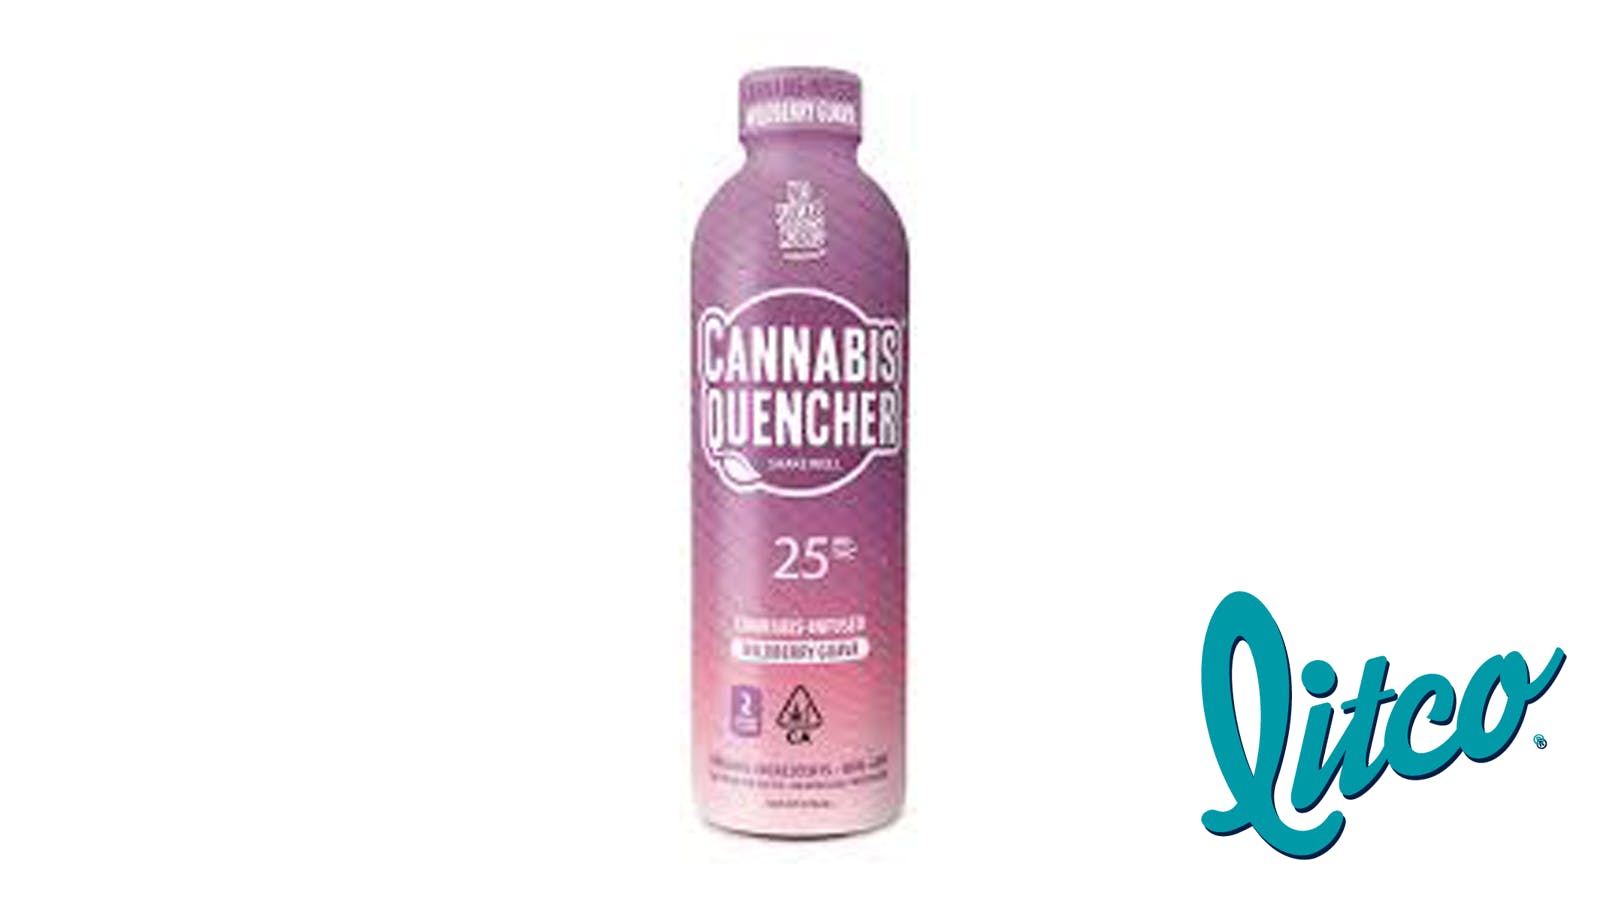 edible-cannabis-quencher-wildberry-guava-drink-25mg